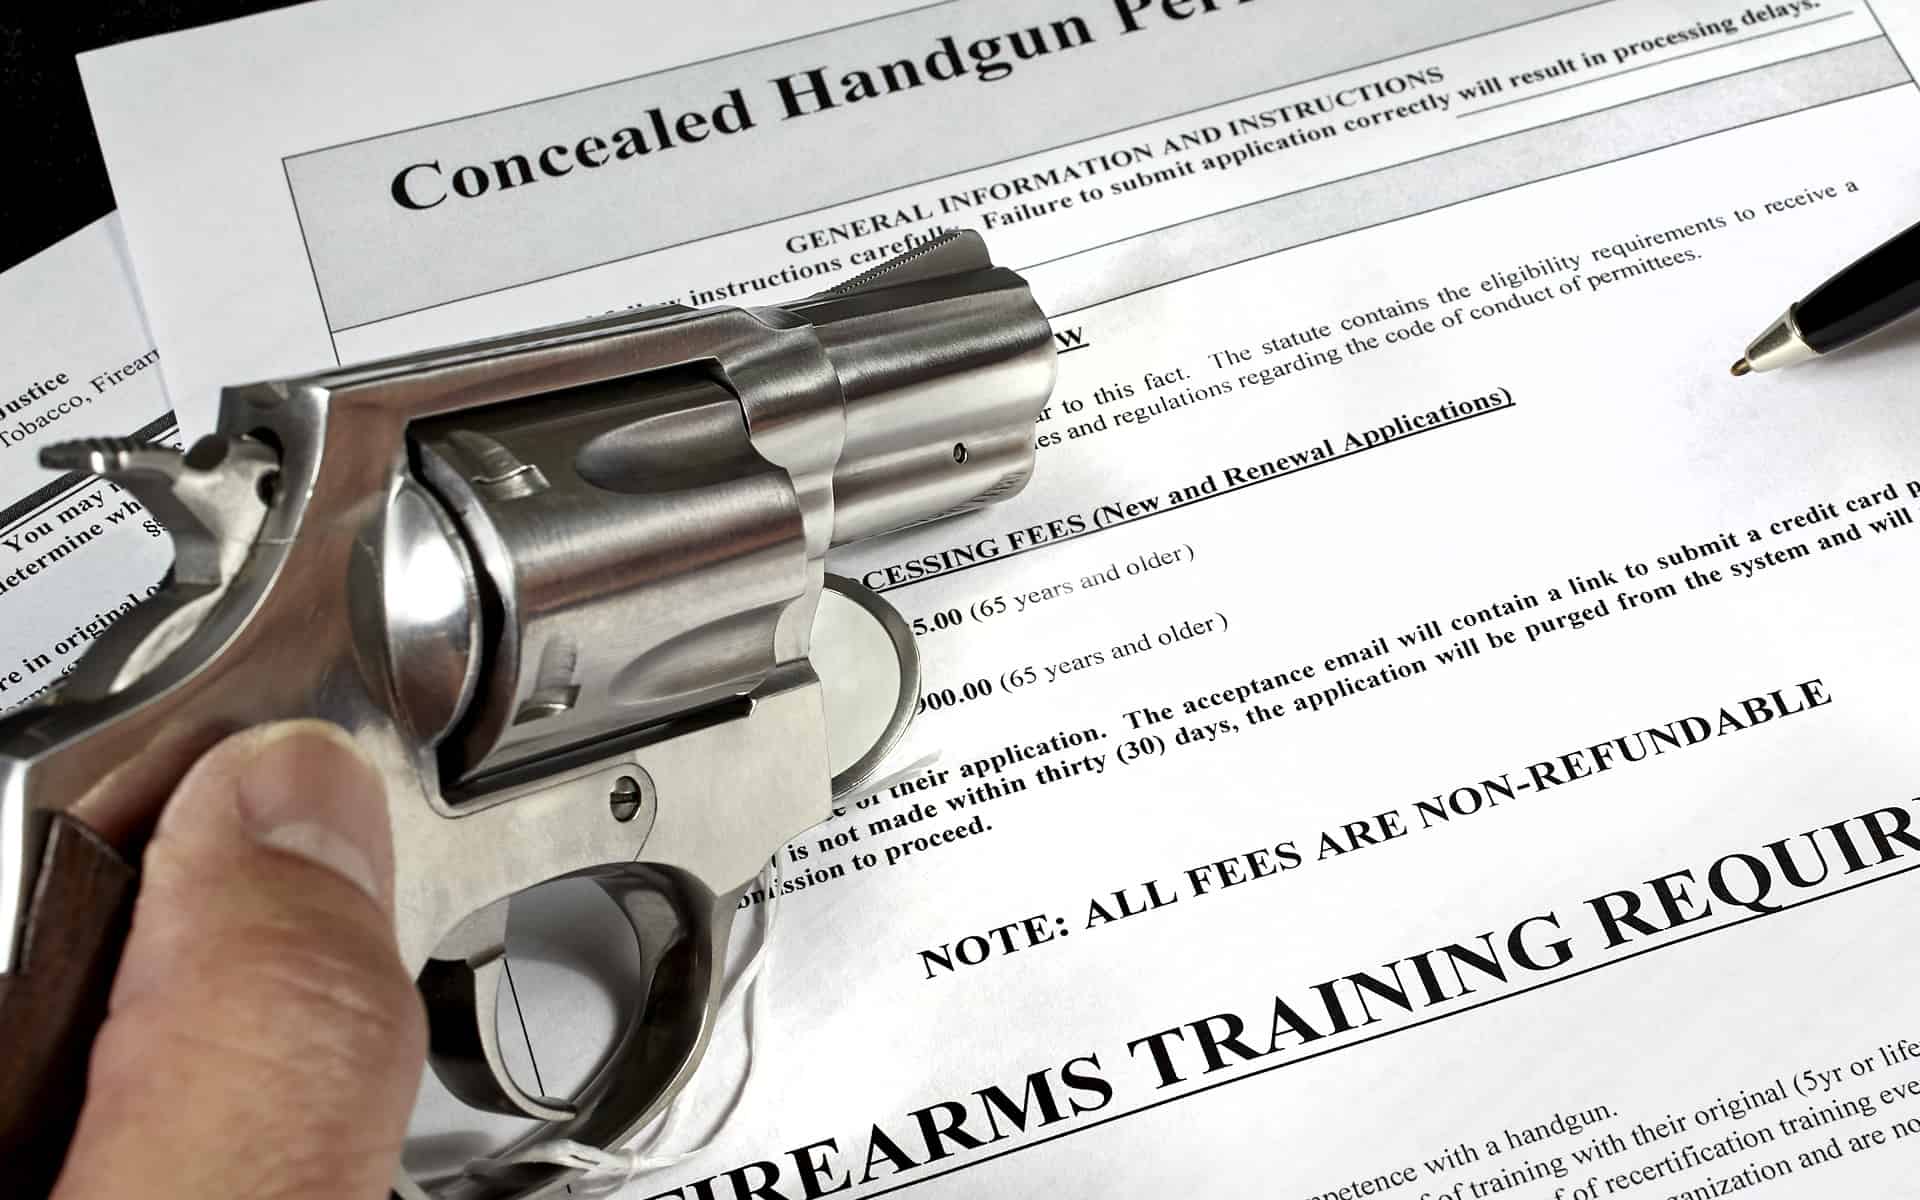 Key Considerations in the New Firearms Licensing Guidance